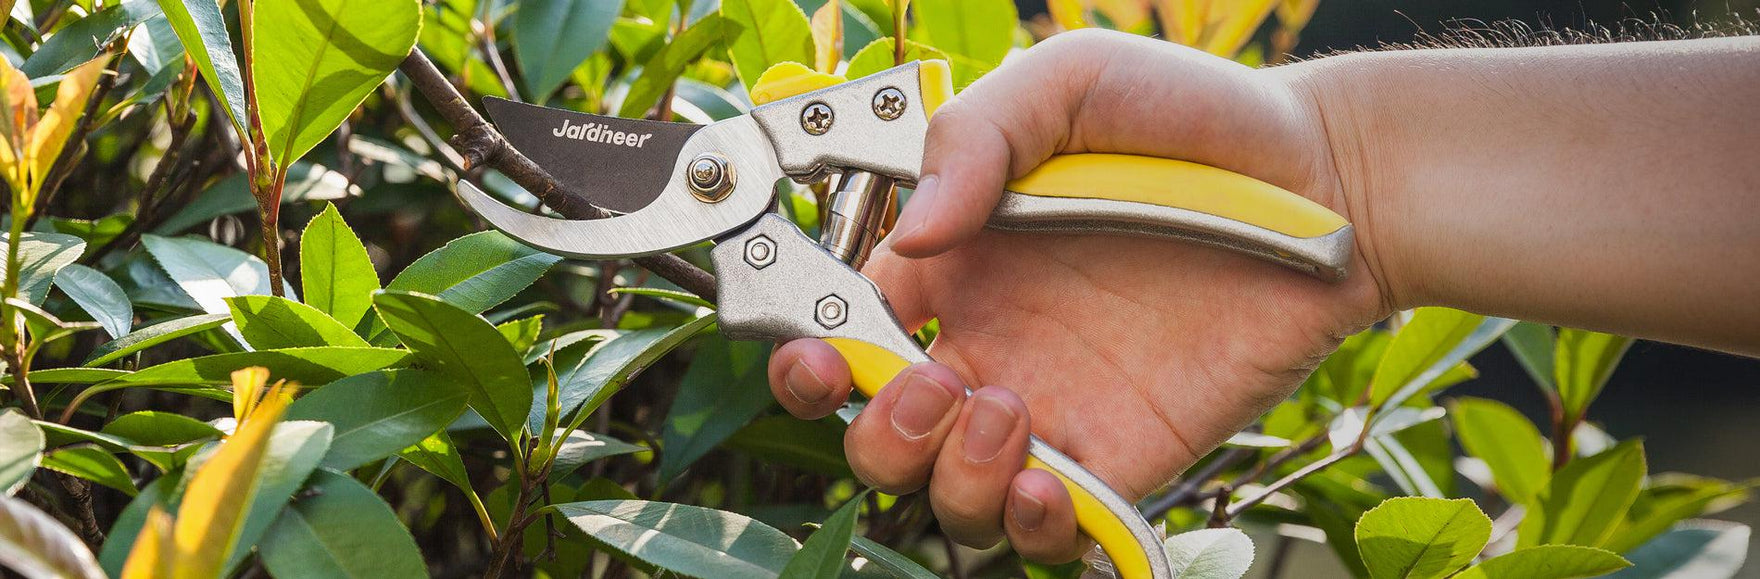 How to start pruning as a beginner